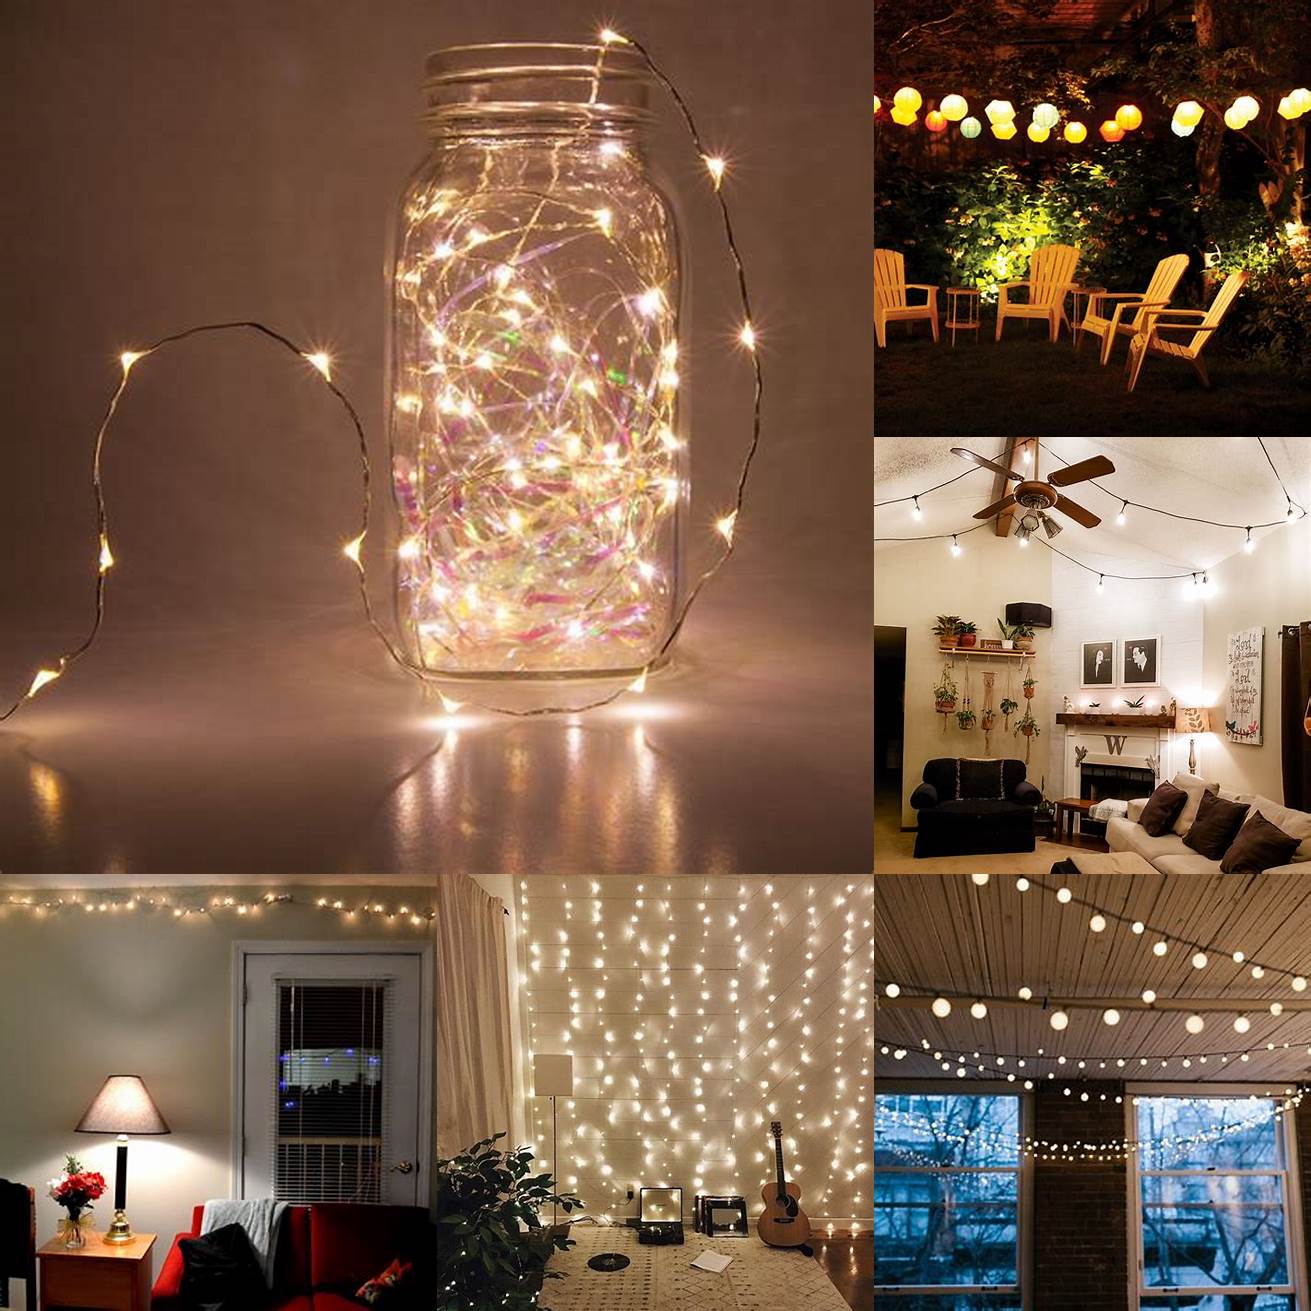 String lights String lights are a great way to add a cozy whimsical touch to any room Hang them above your bed or around a mirror for a romantic vibe